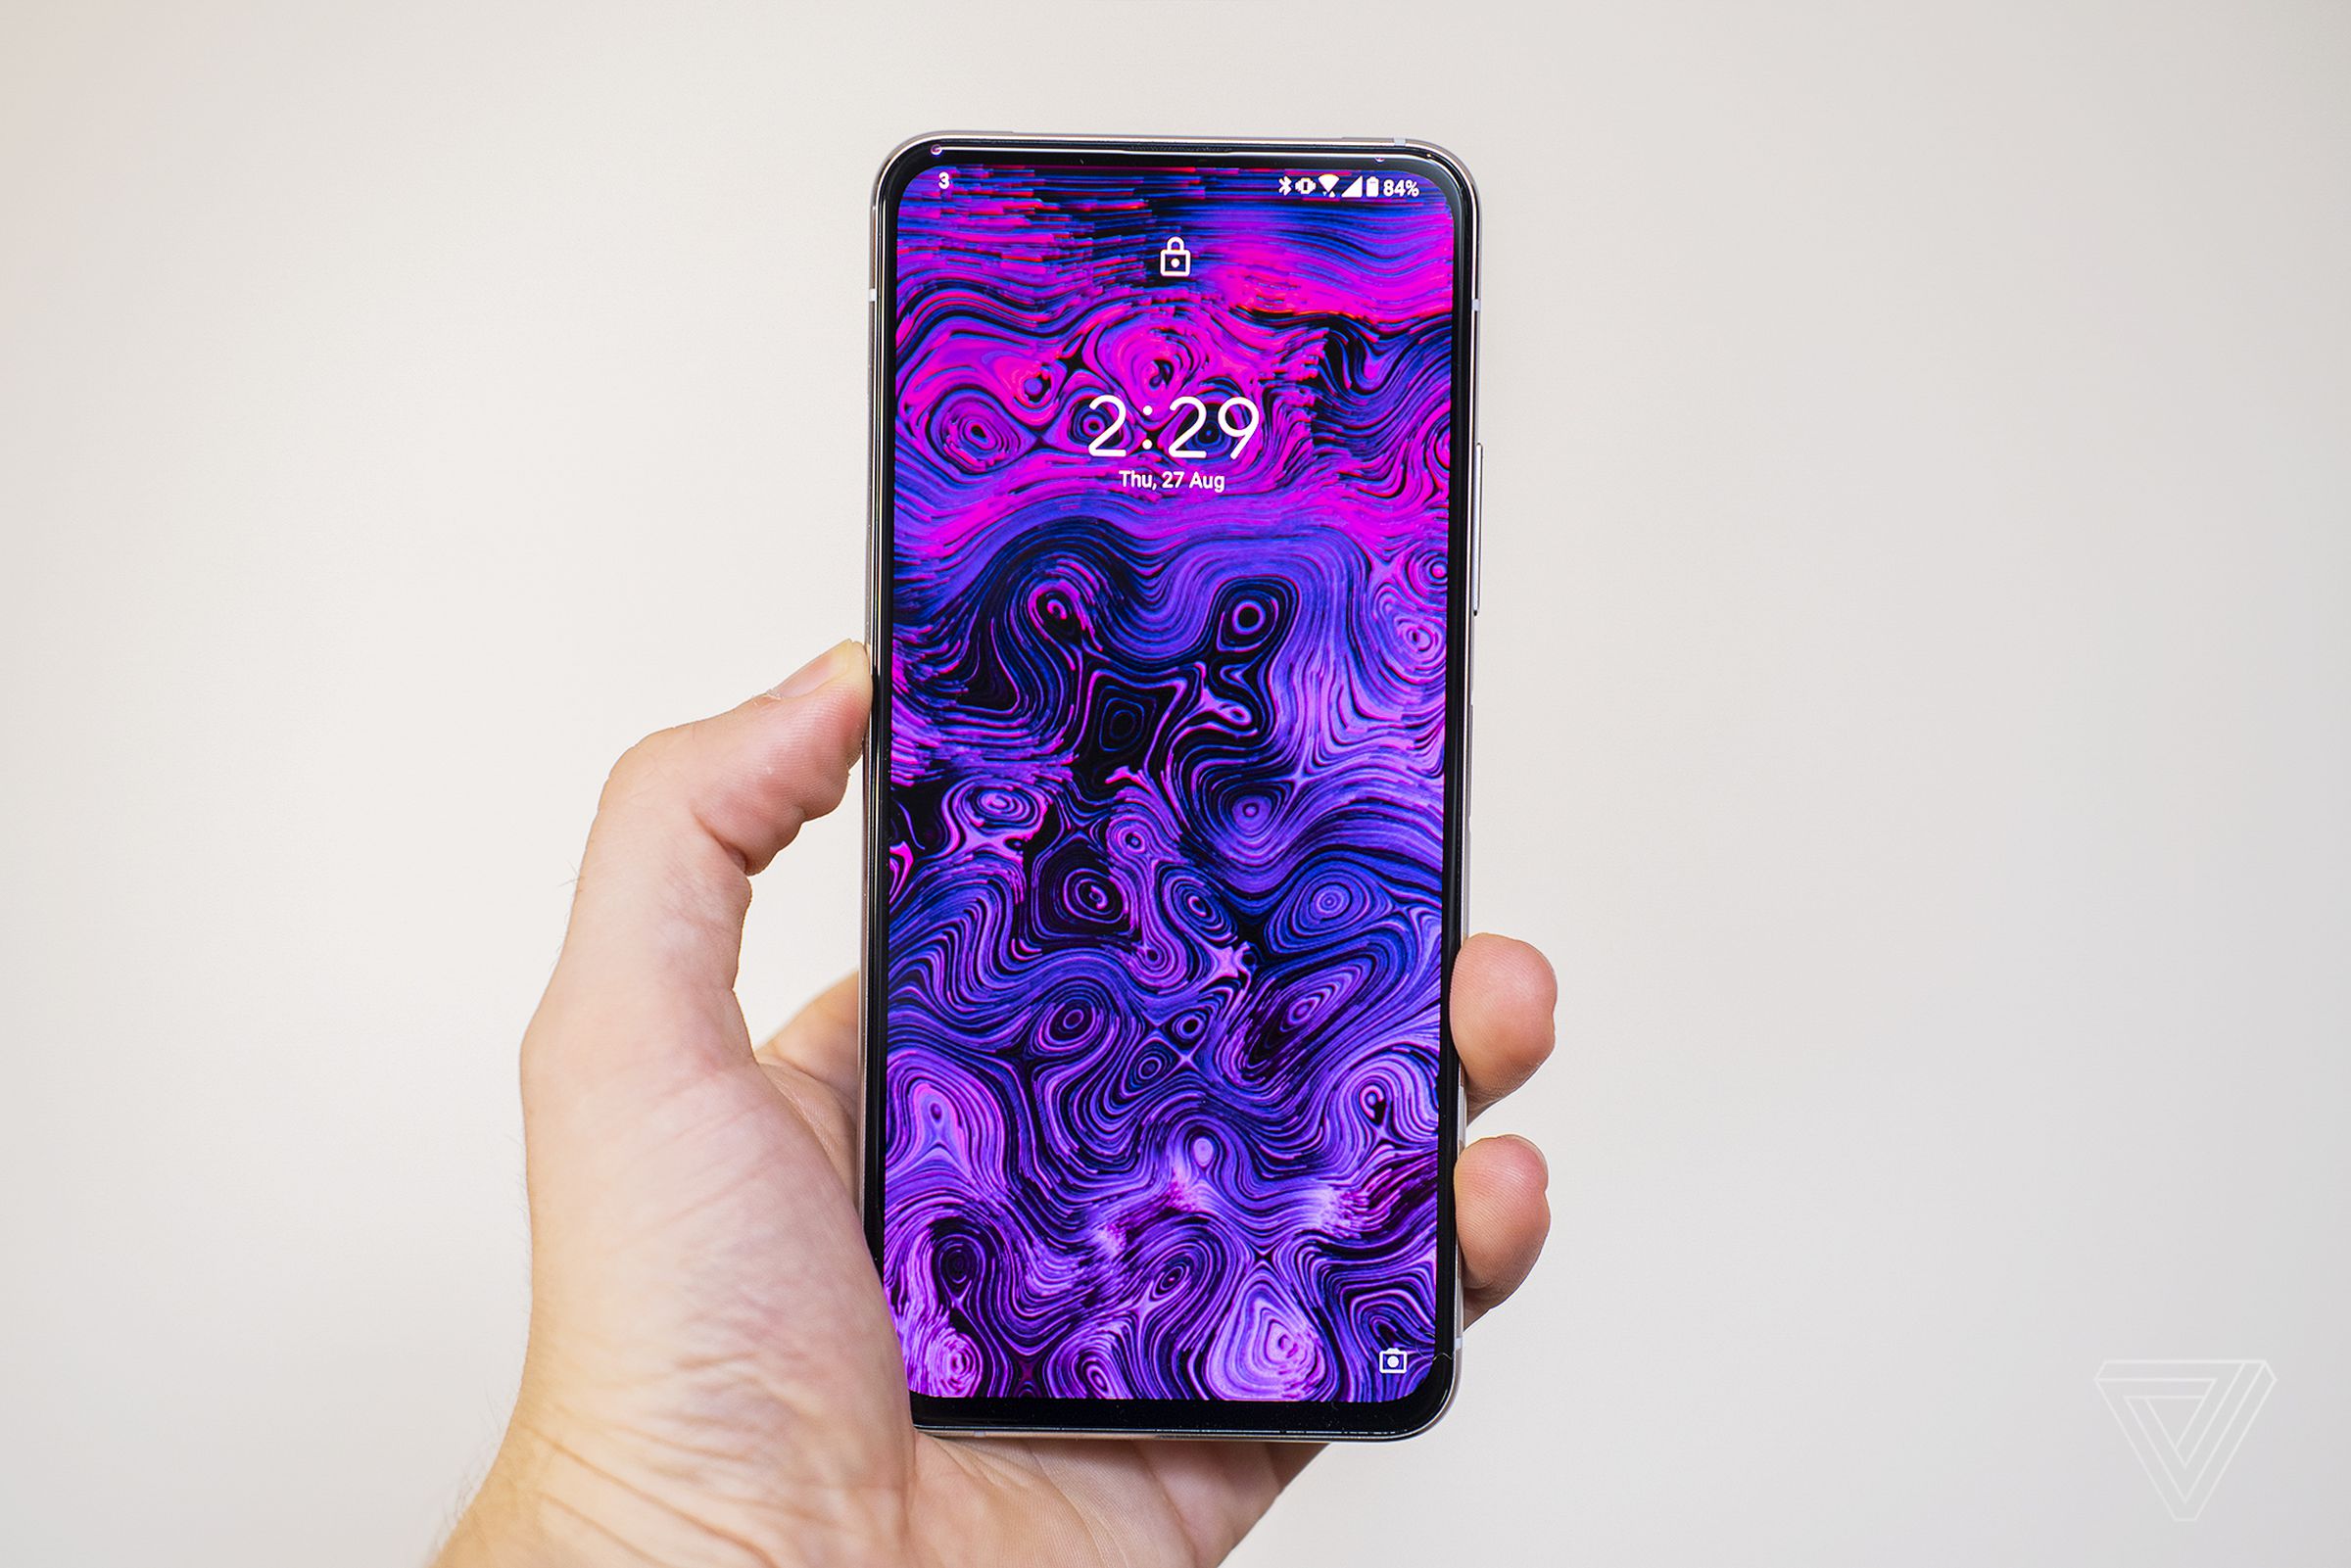 With a 6.67-inch display and weighing 230g, the Zenfone 7 Pro is a bulky phone.